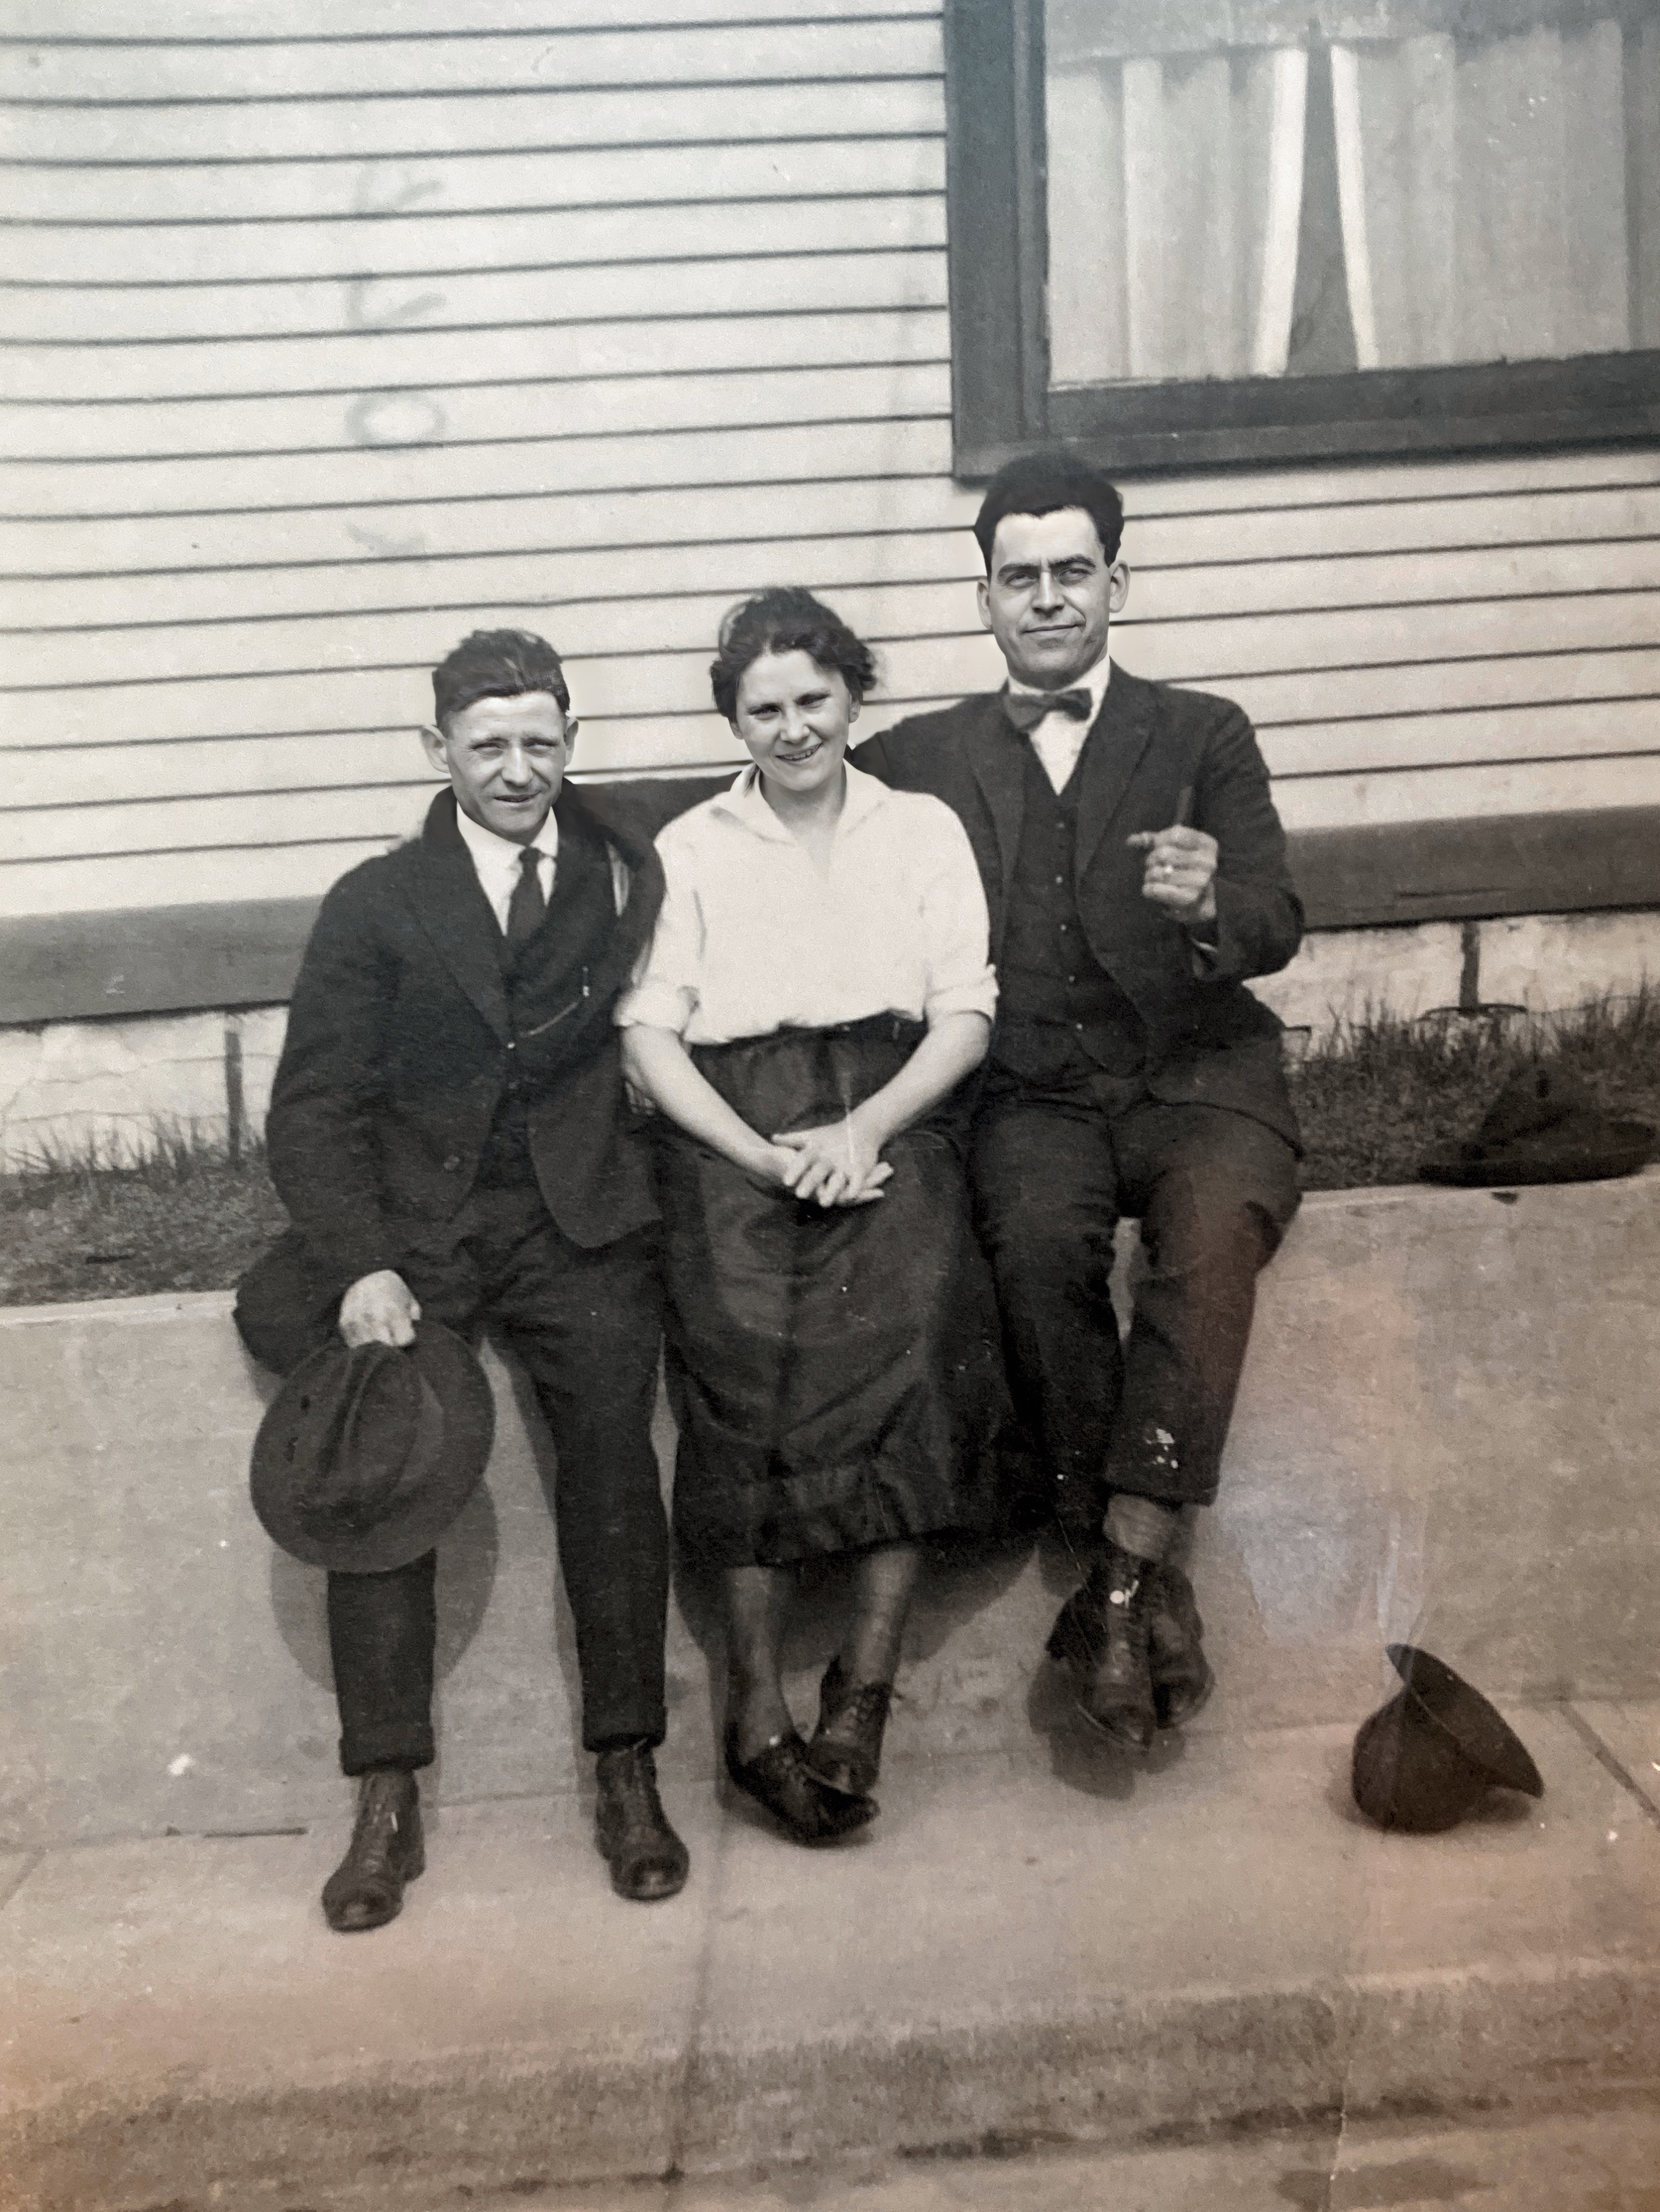 Reuben Culp and Lettie Mae Kuiper with Reuben’s father, David Syrean Culp on the day of their wedding 9 Aug 1910 in Grand Rapids, MI.